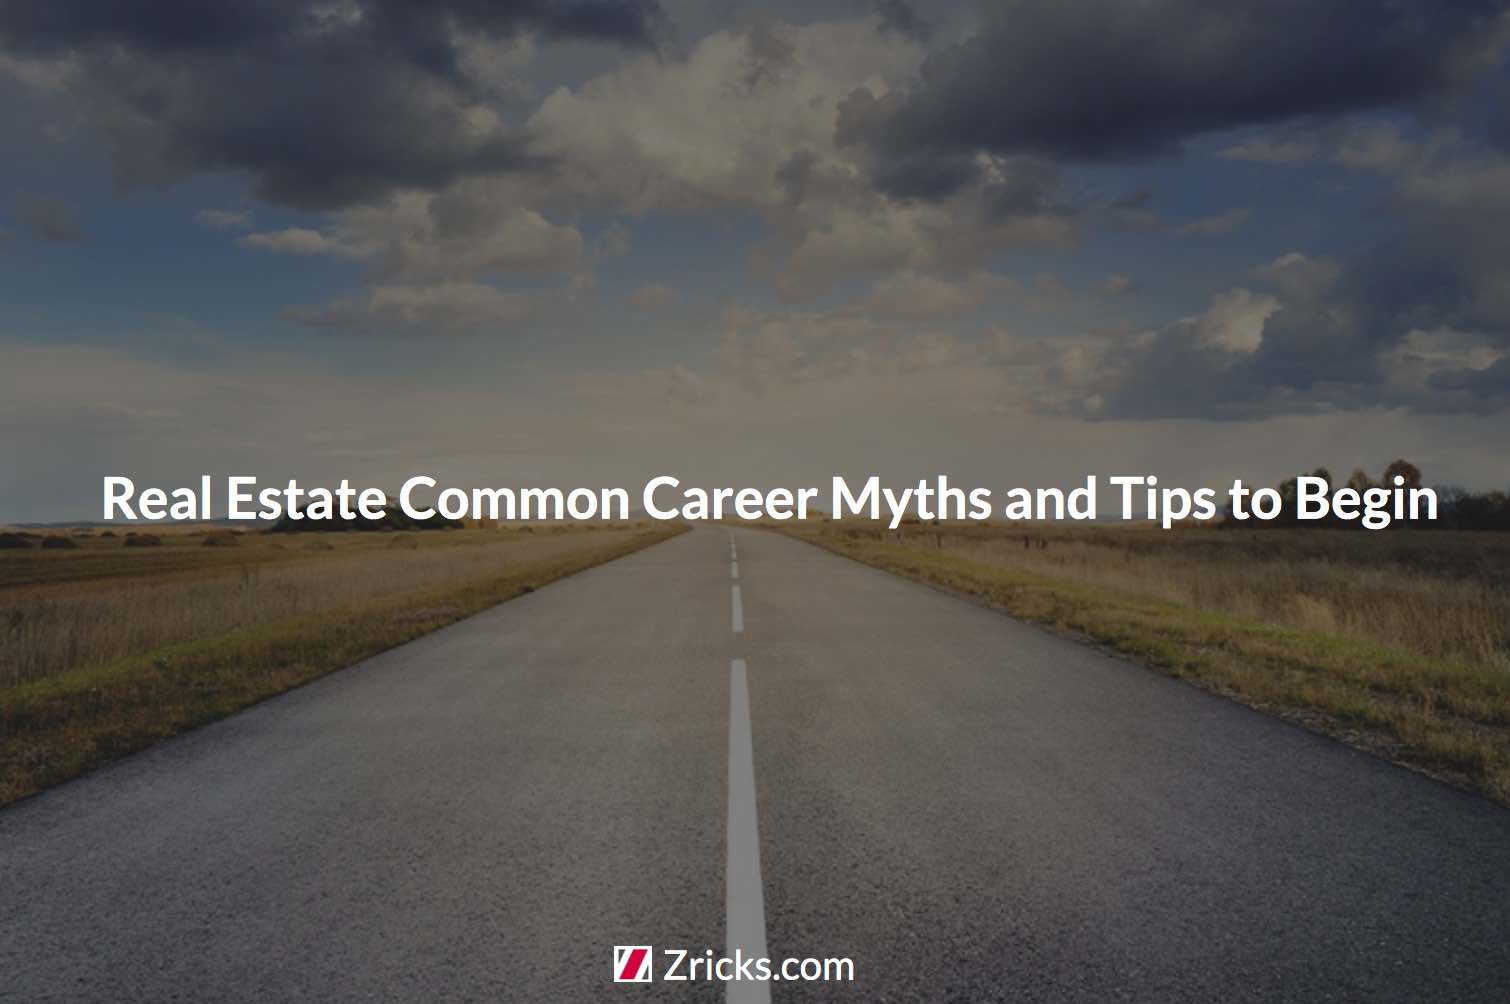 Real Estate Common Career Myths and Tips to Begin Update